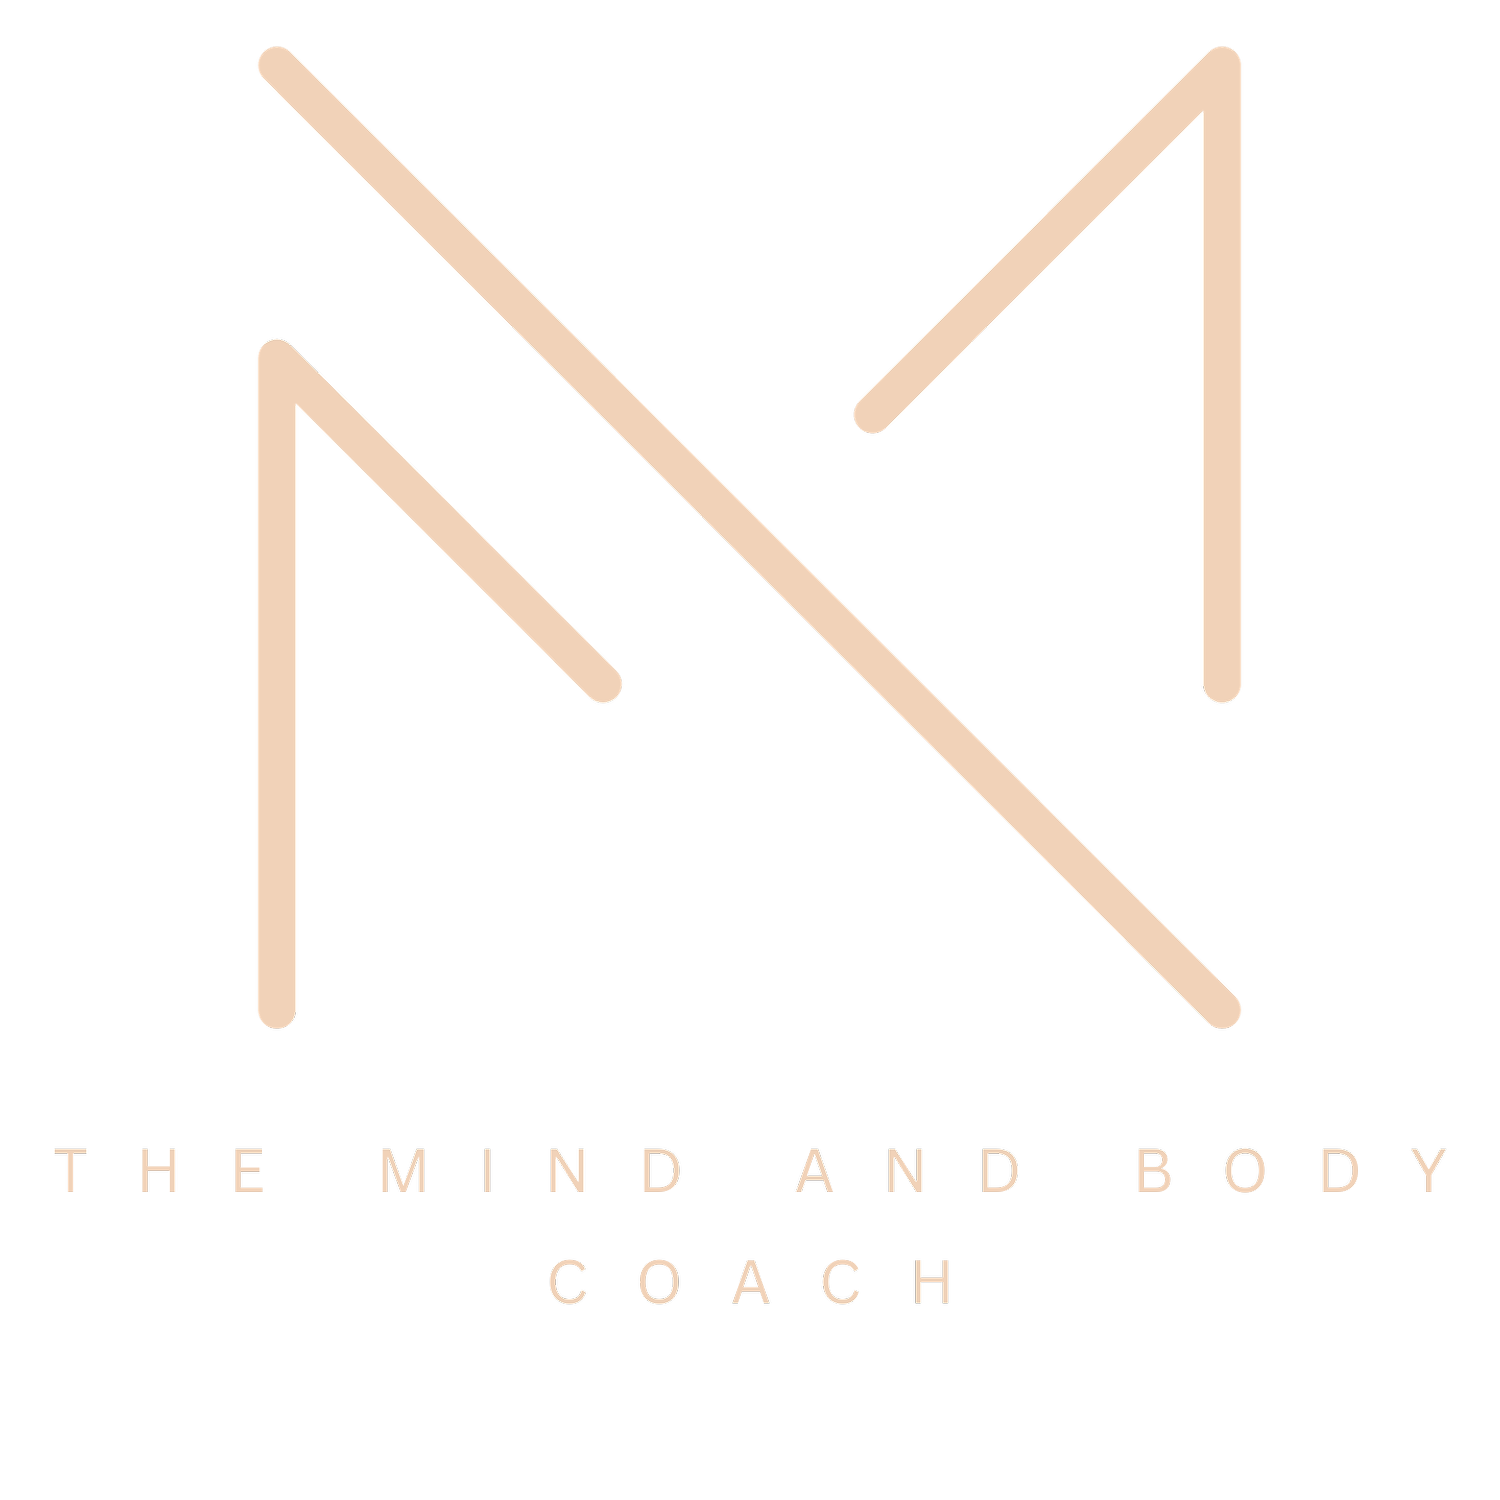 THE MIND AND BODY COACH